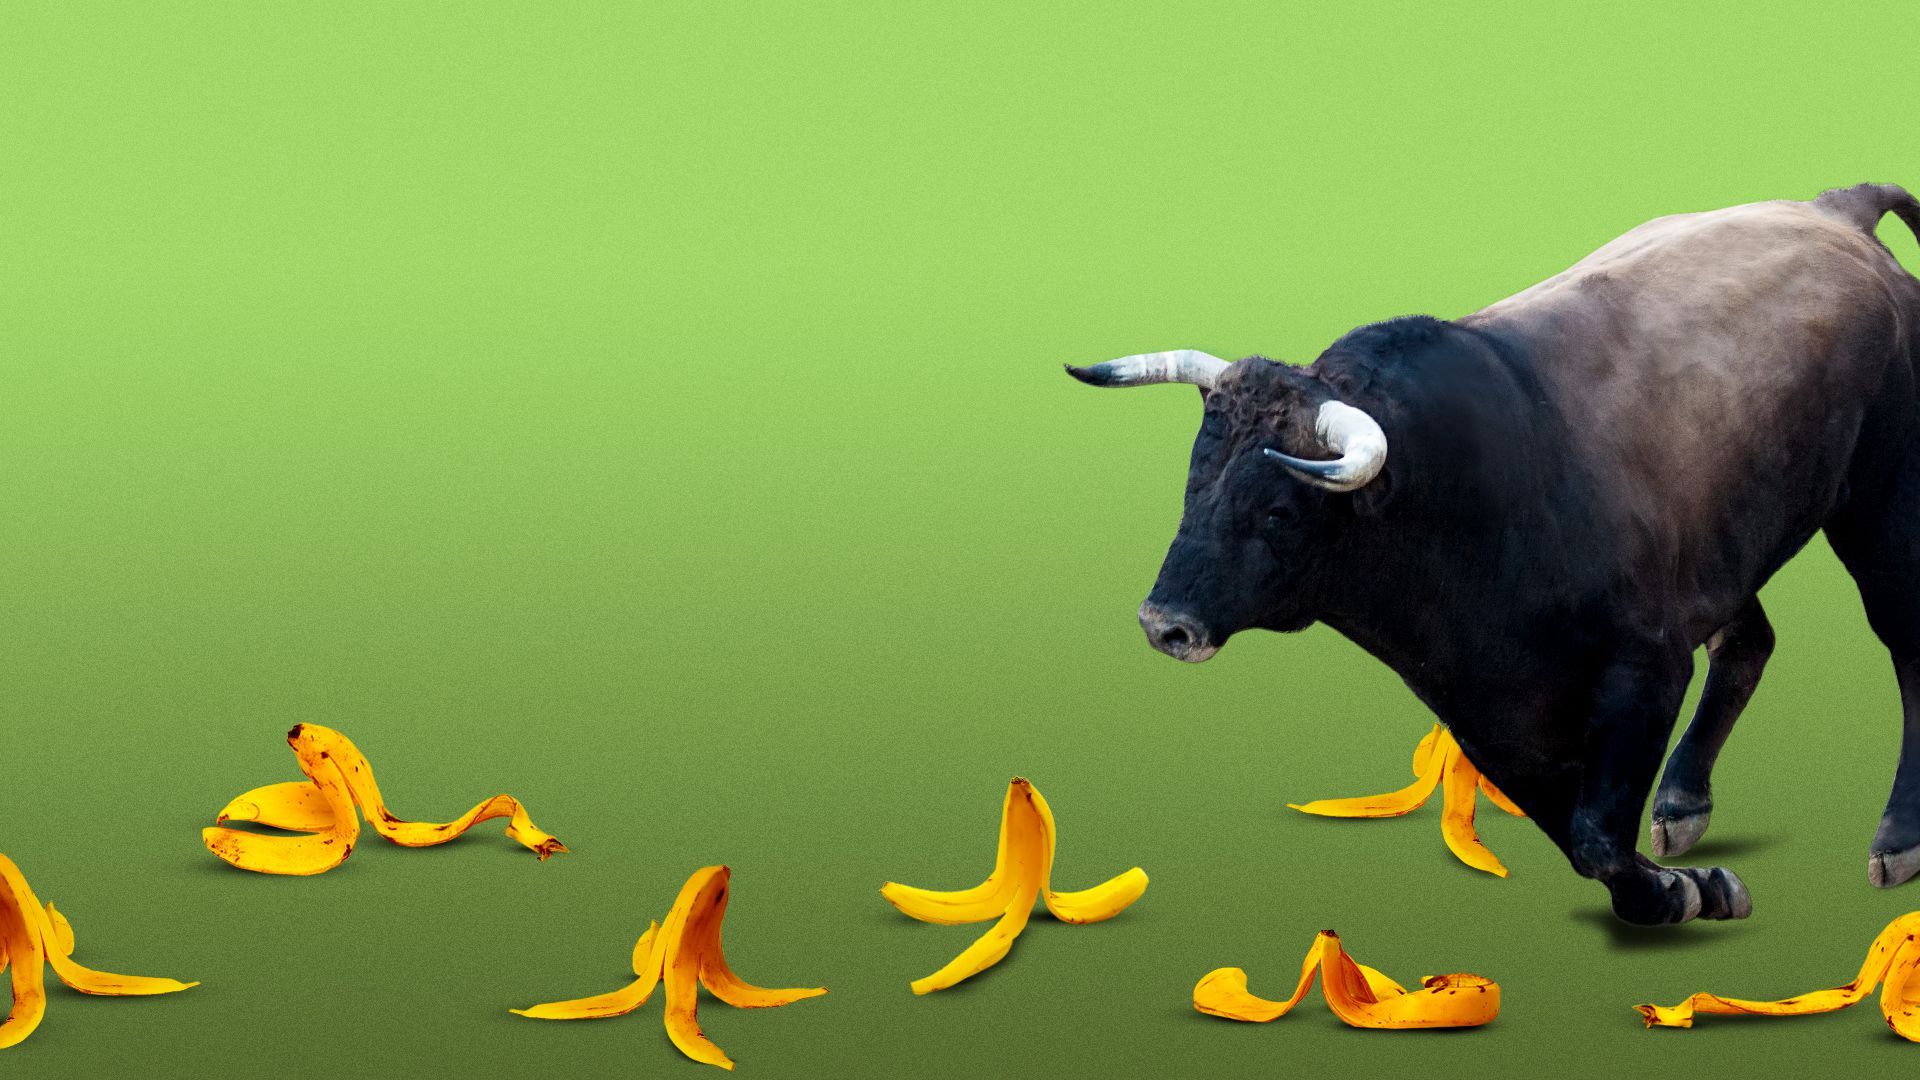 Illustration of a bull slipping on a floor covered in banana peels. 